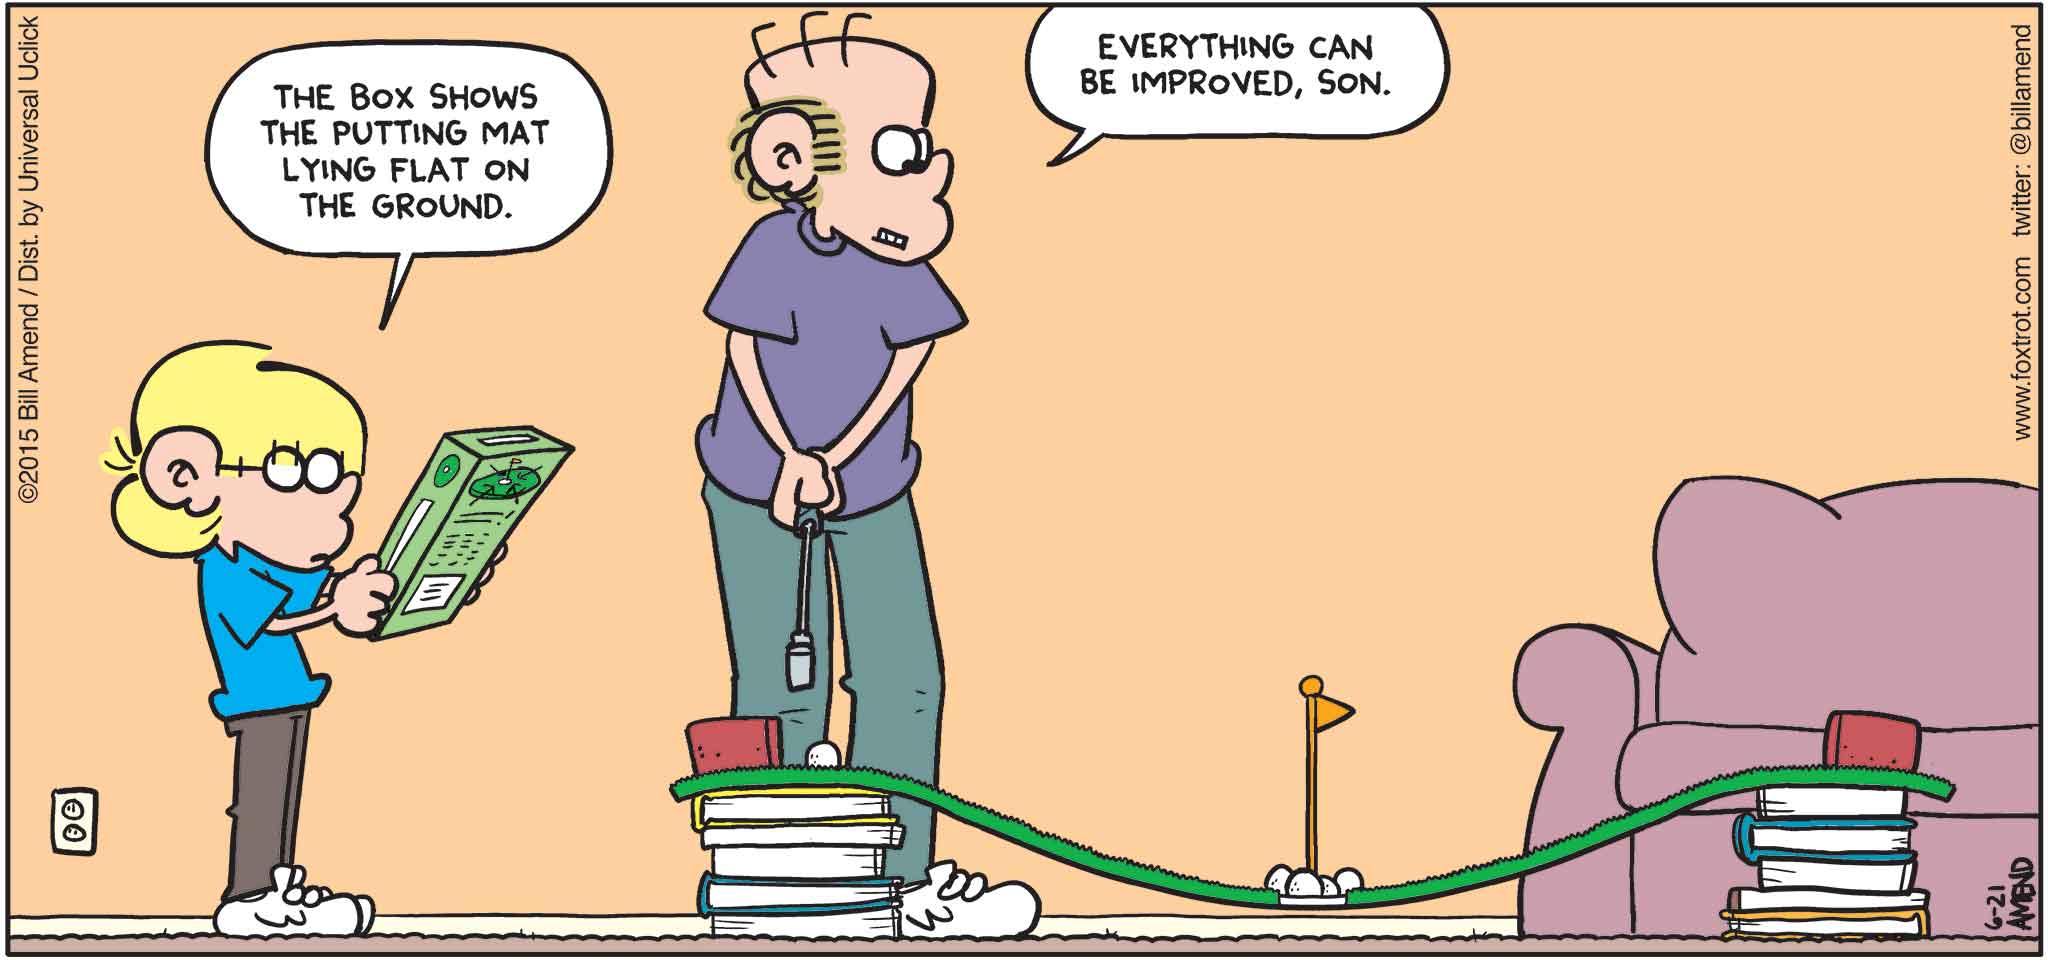 FoxTrot by Bill Amend - "Hole Everything" published June 21, 2015 - Jason: The box shows the putting mat lying flat on the ground. Roger: Everything can be improved, son. 